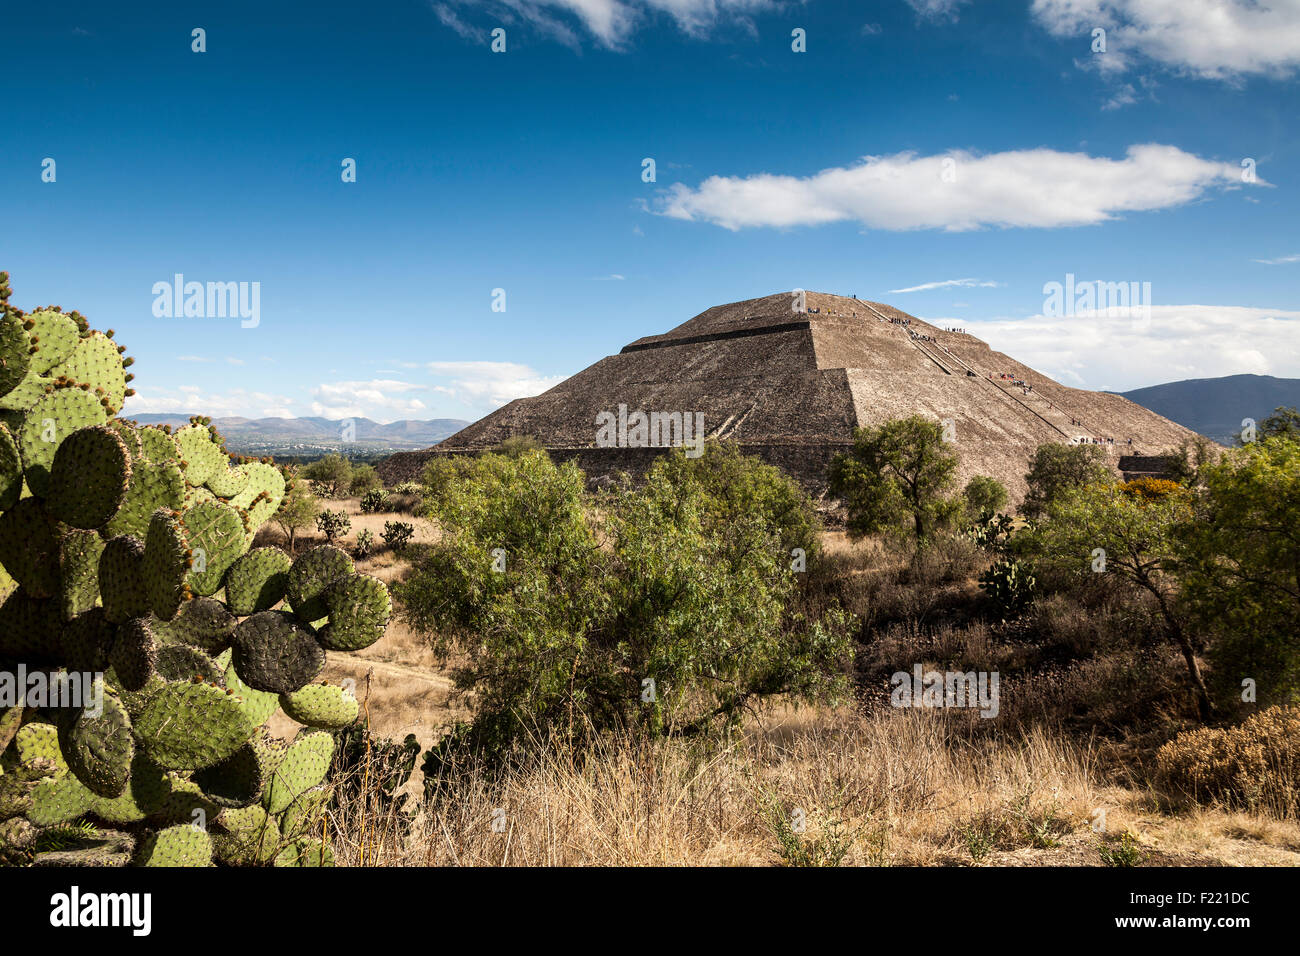 Pyramid of the Sun Teotihuacan archaeological site Unesco World Heritage Site Mexico America Stock Photo